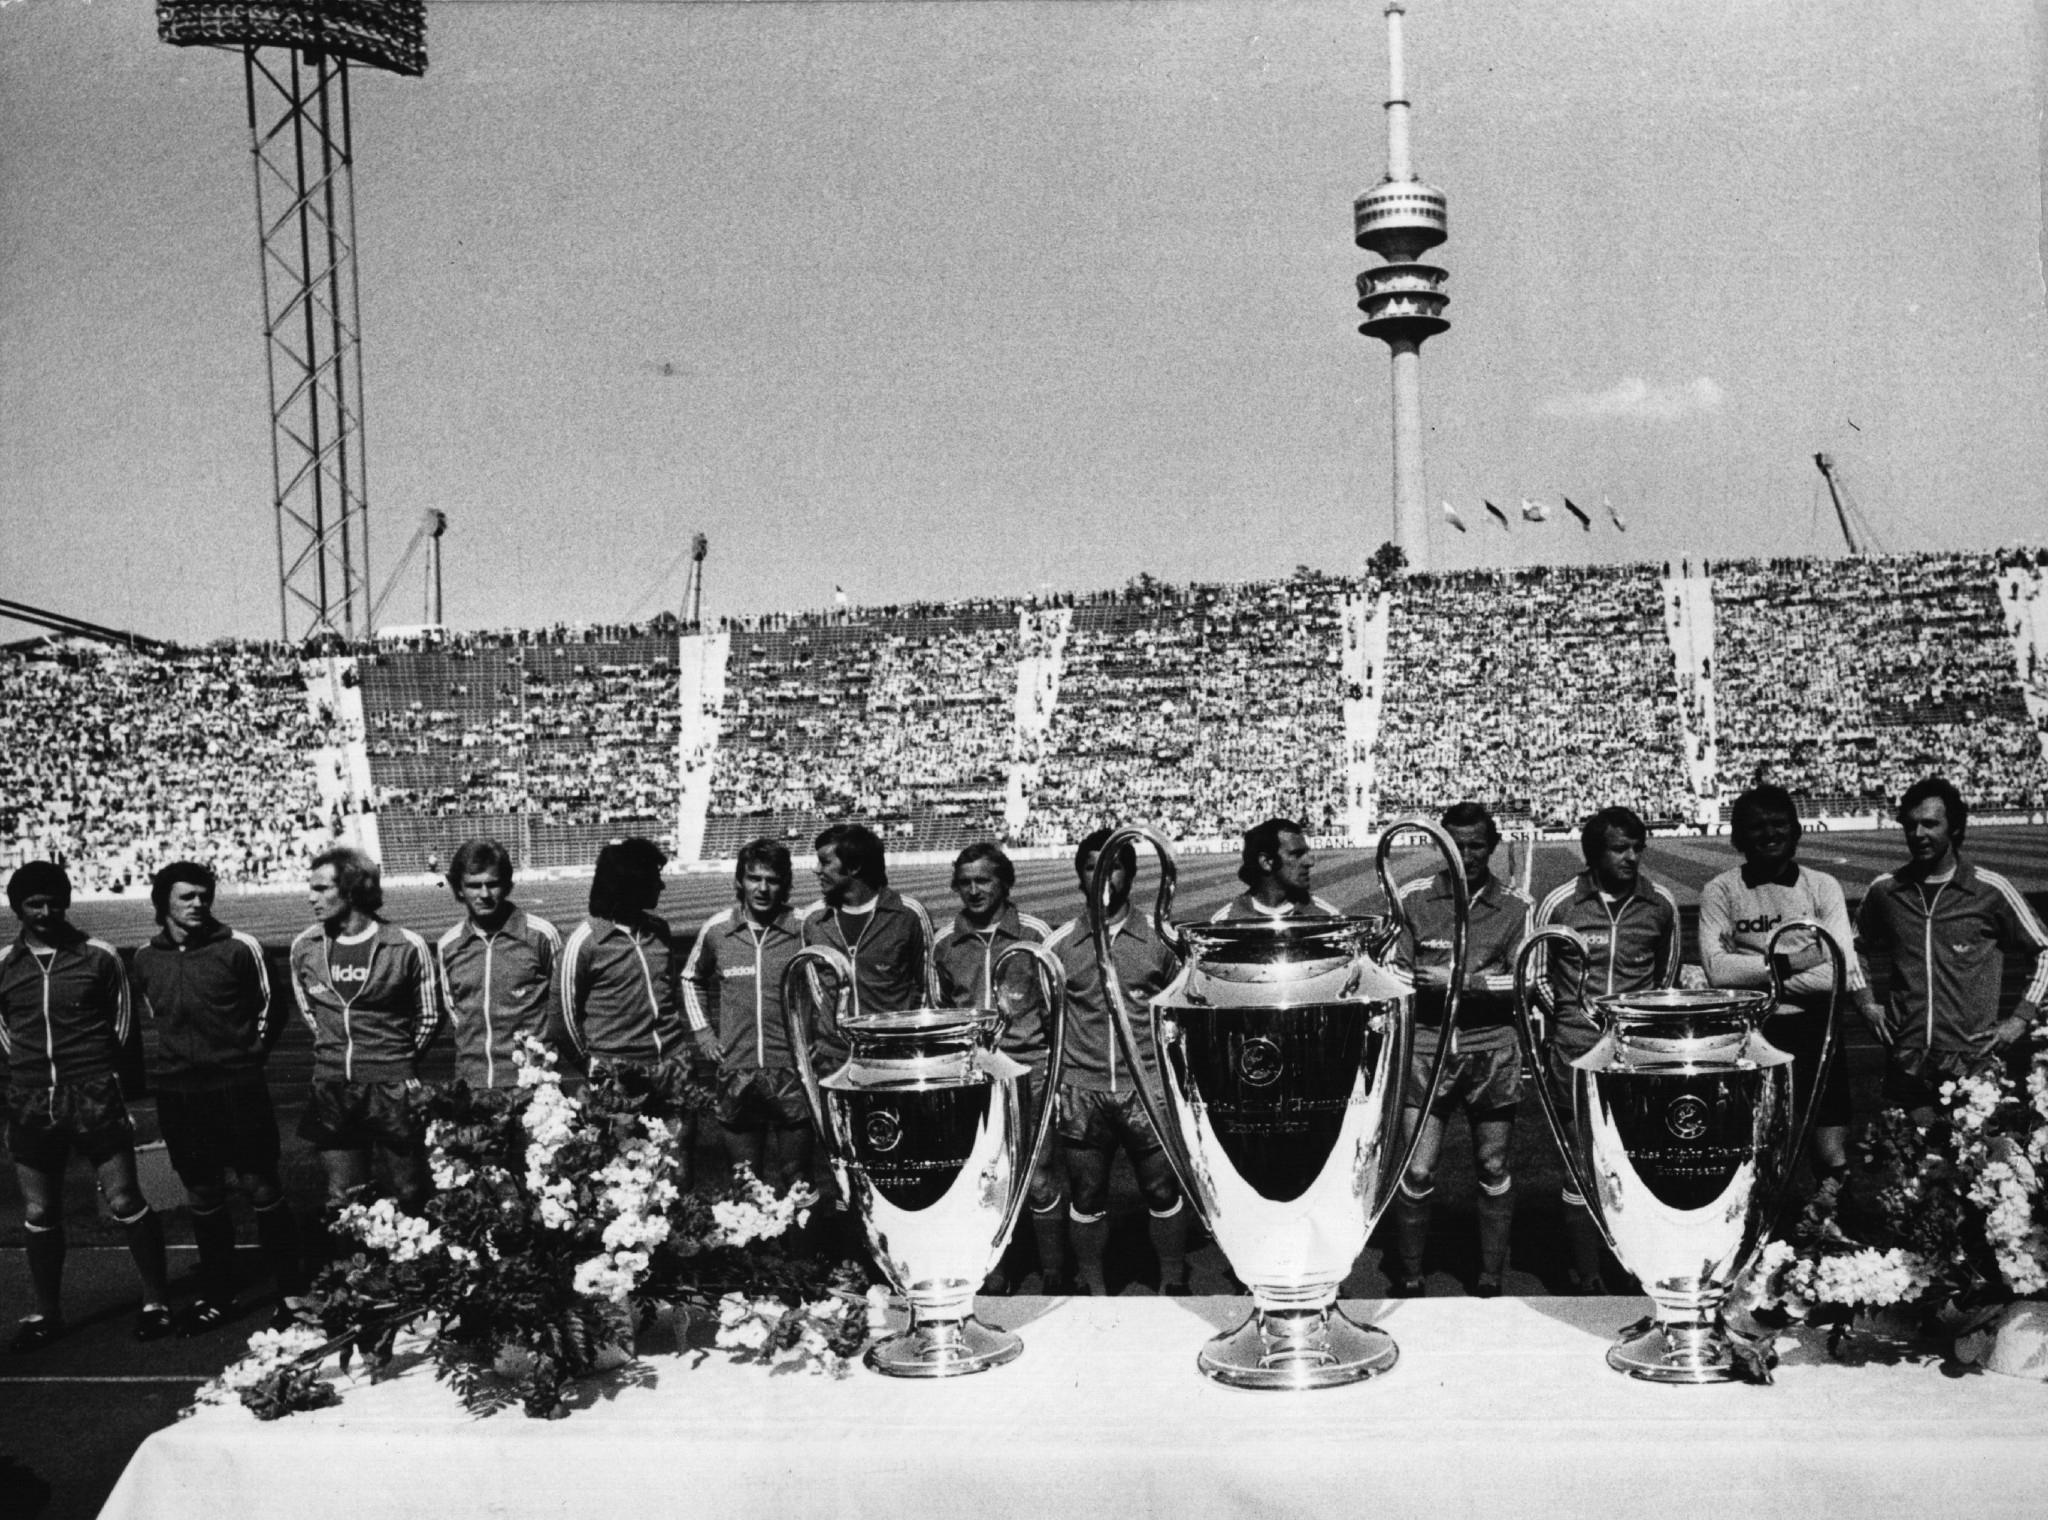 Bayern Munich won three consecutive European Cups after moving to the Olympiastadion ©Getty Images